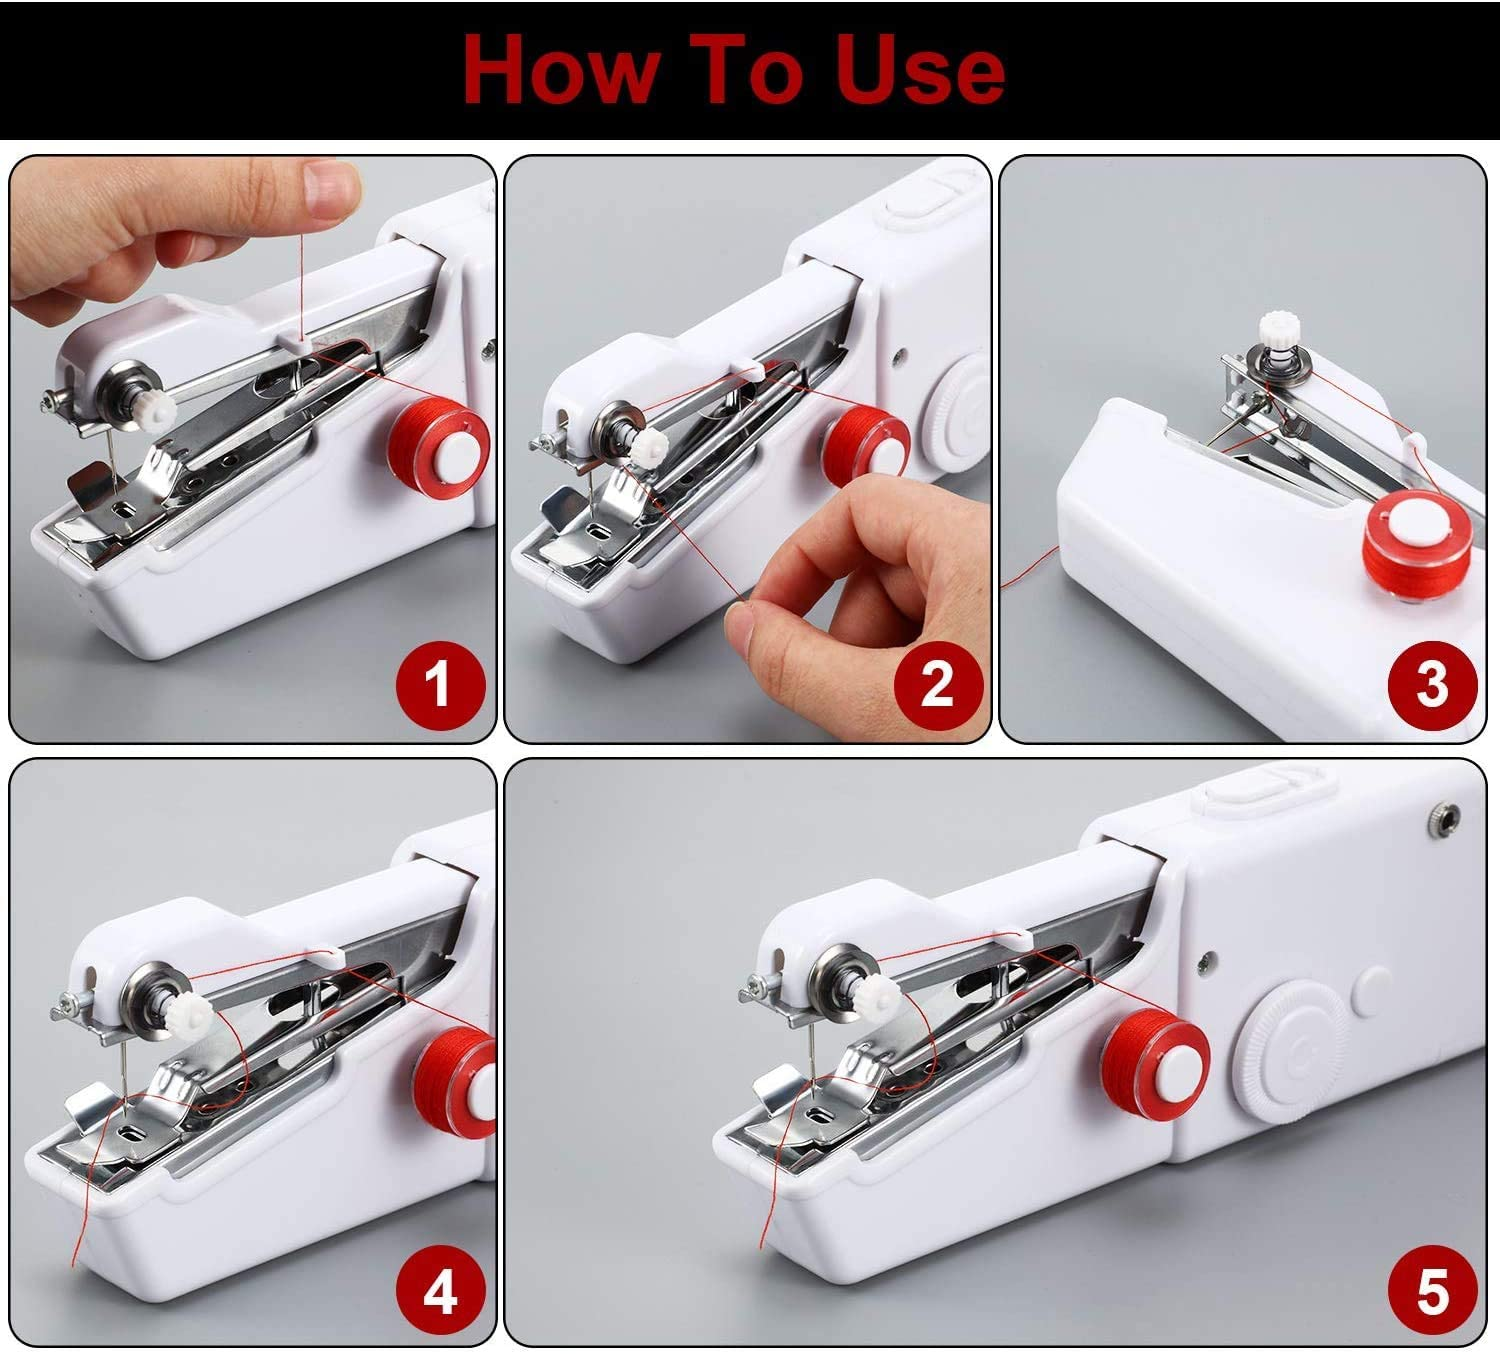 Handheld Sewing Machine Portable Stitching Machine Mini Sewing Machine Accessories with Soft Tape Measure, Sewing Bobbins for Fabric Clothing Kids Cloth, Home and Travel Use